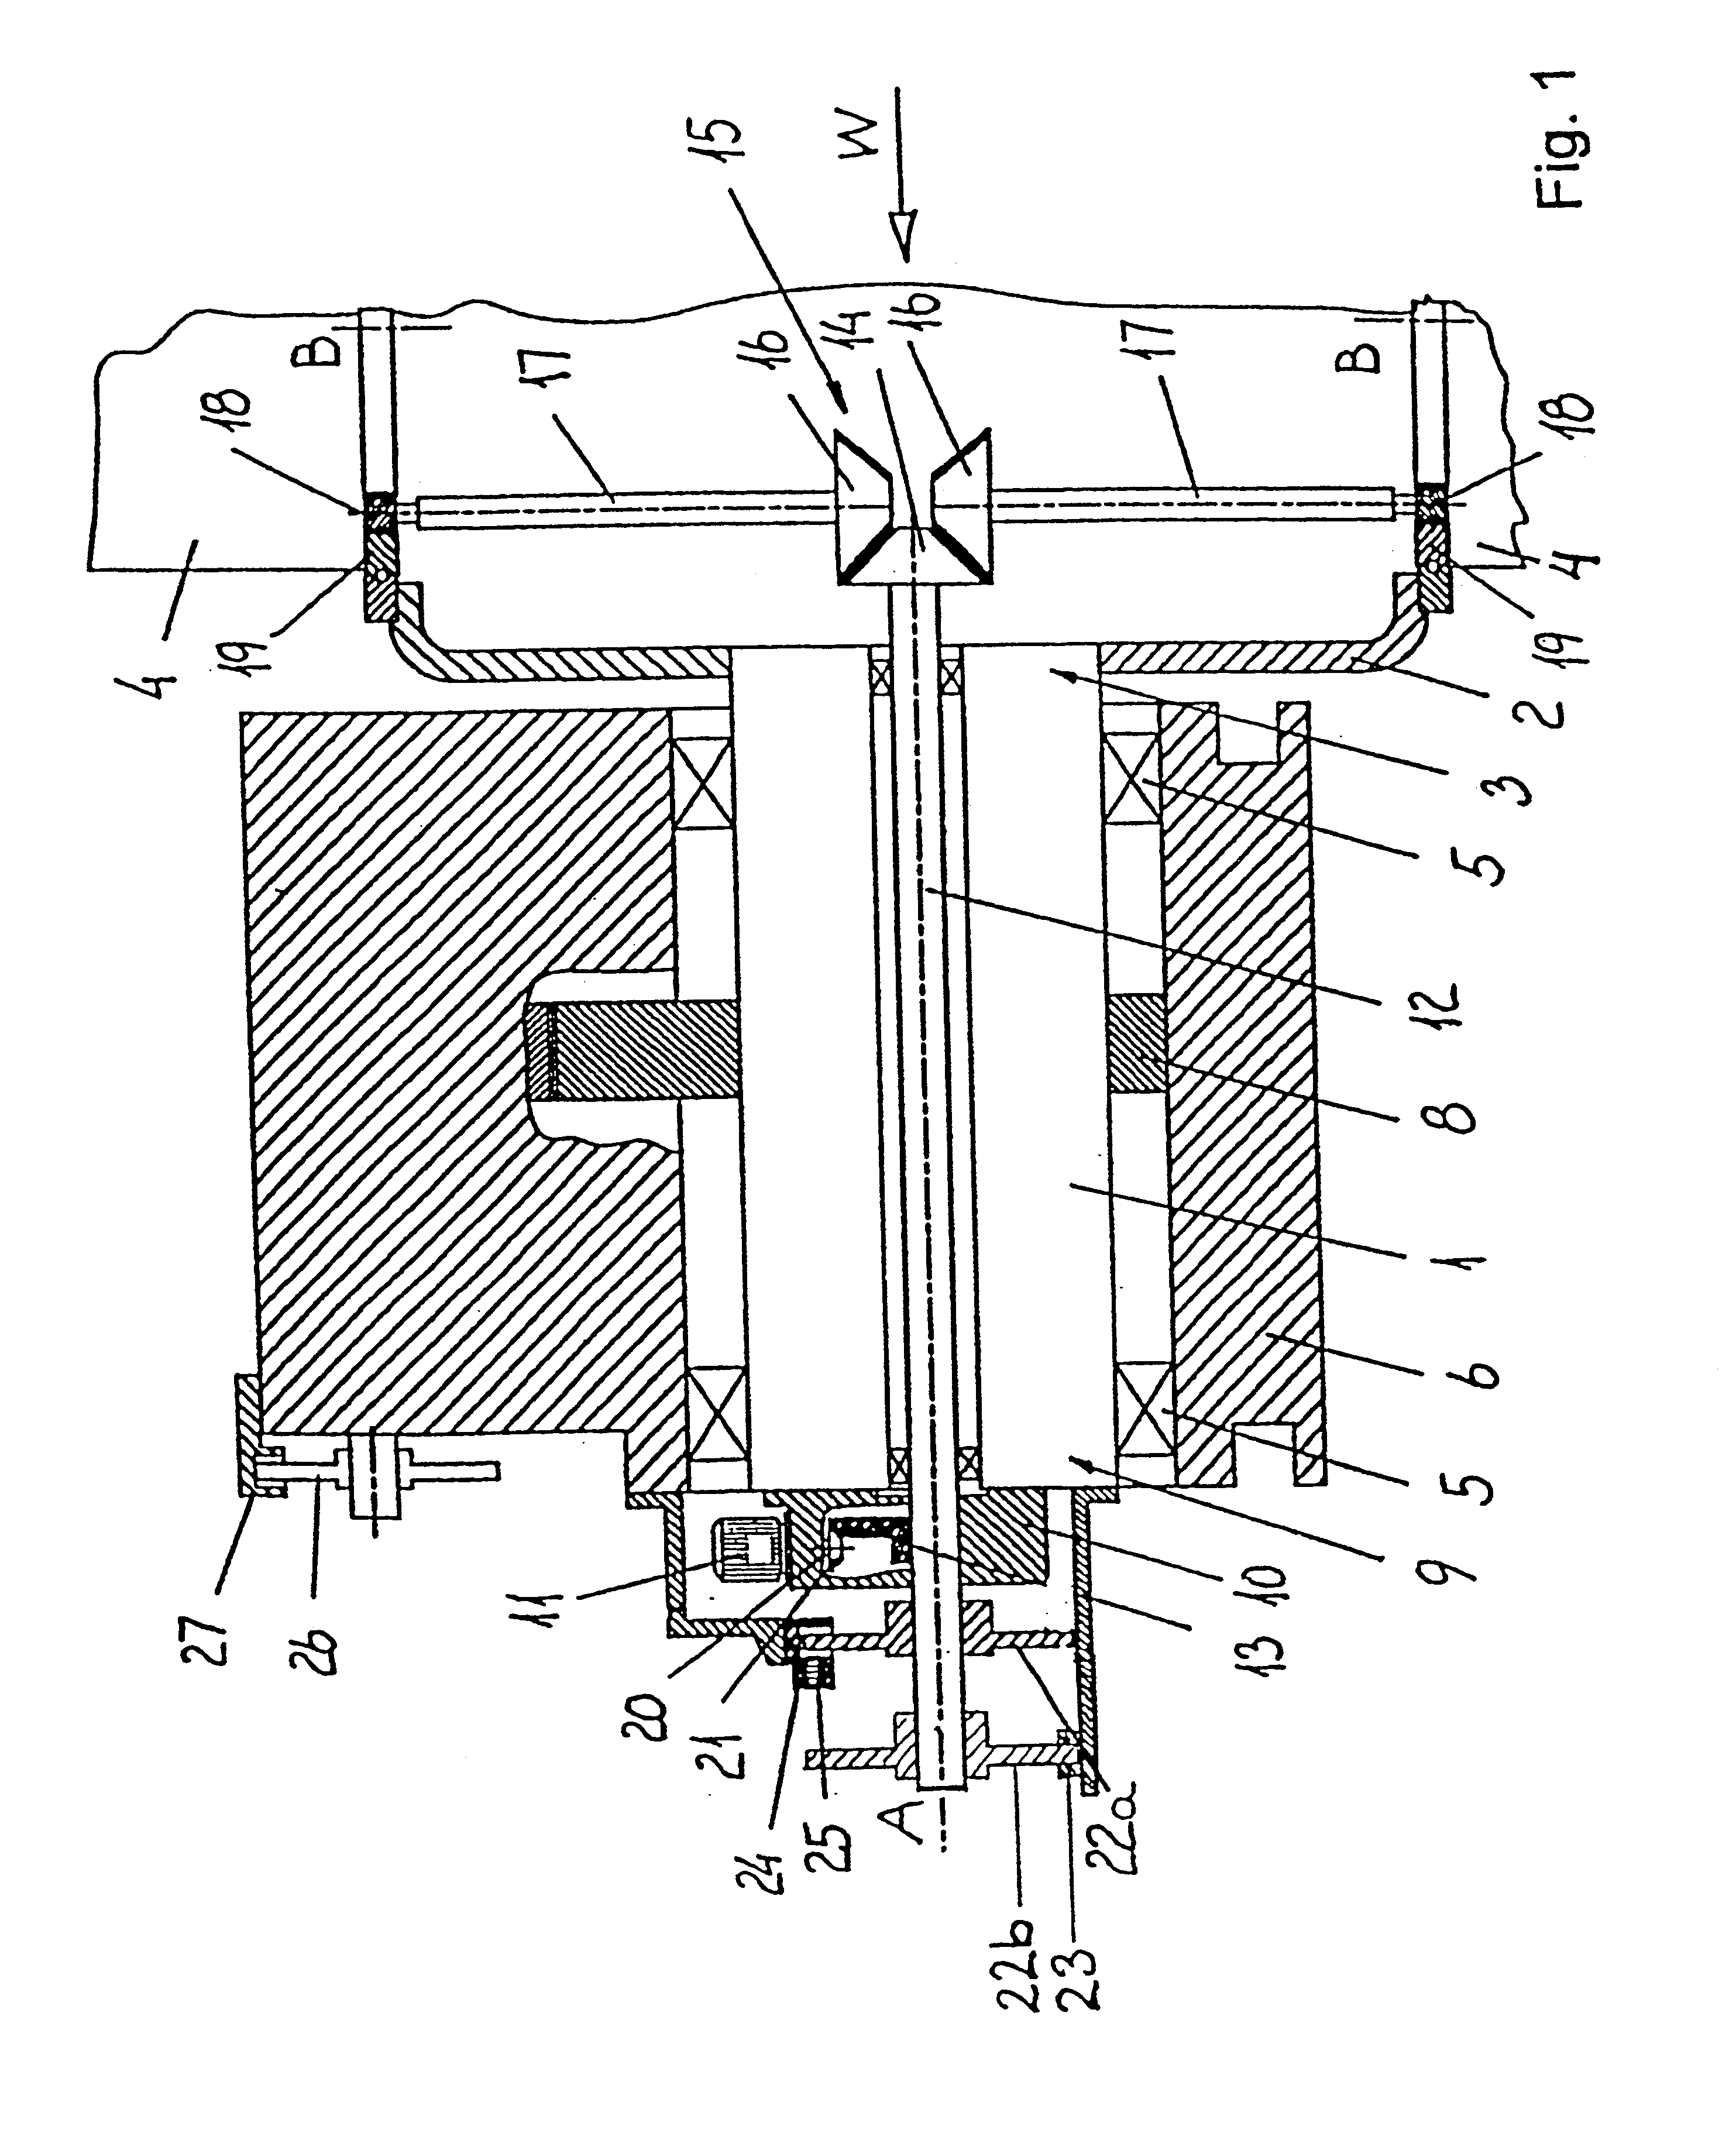 Method and a device for adjusting the pitch and stopping the rotation of the blades of a wind turbine